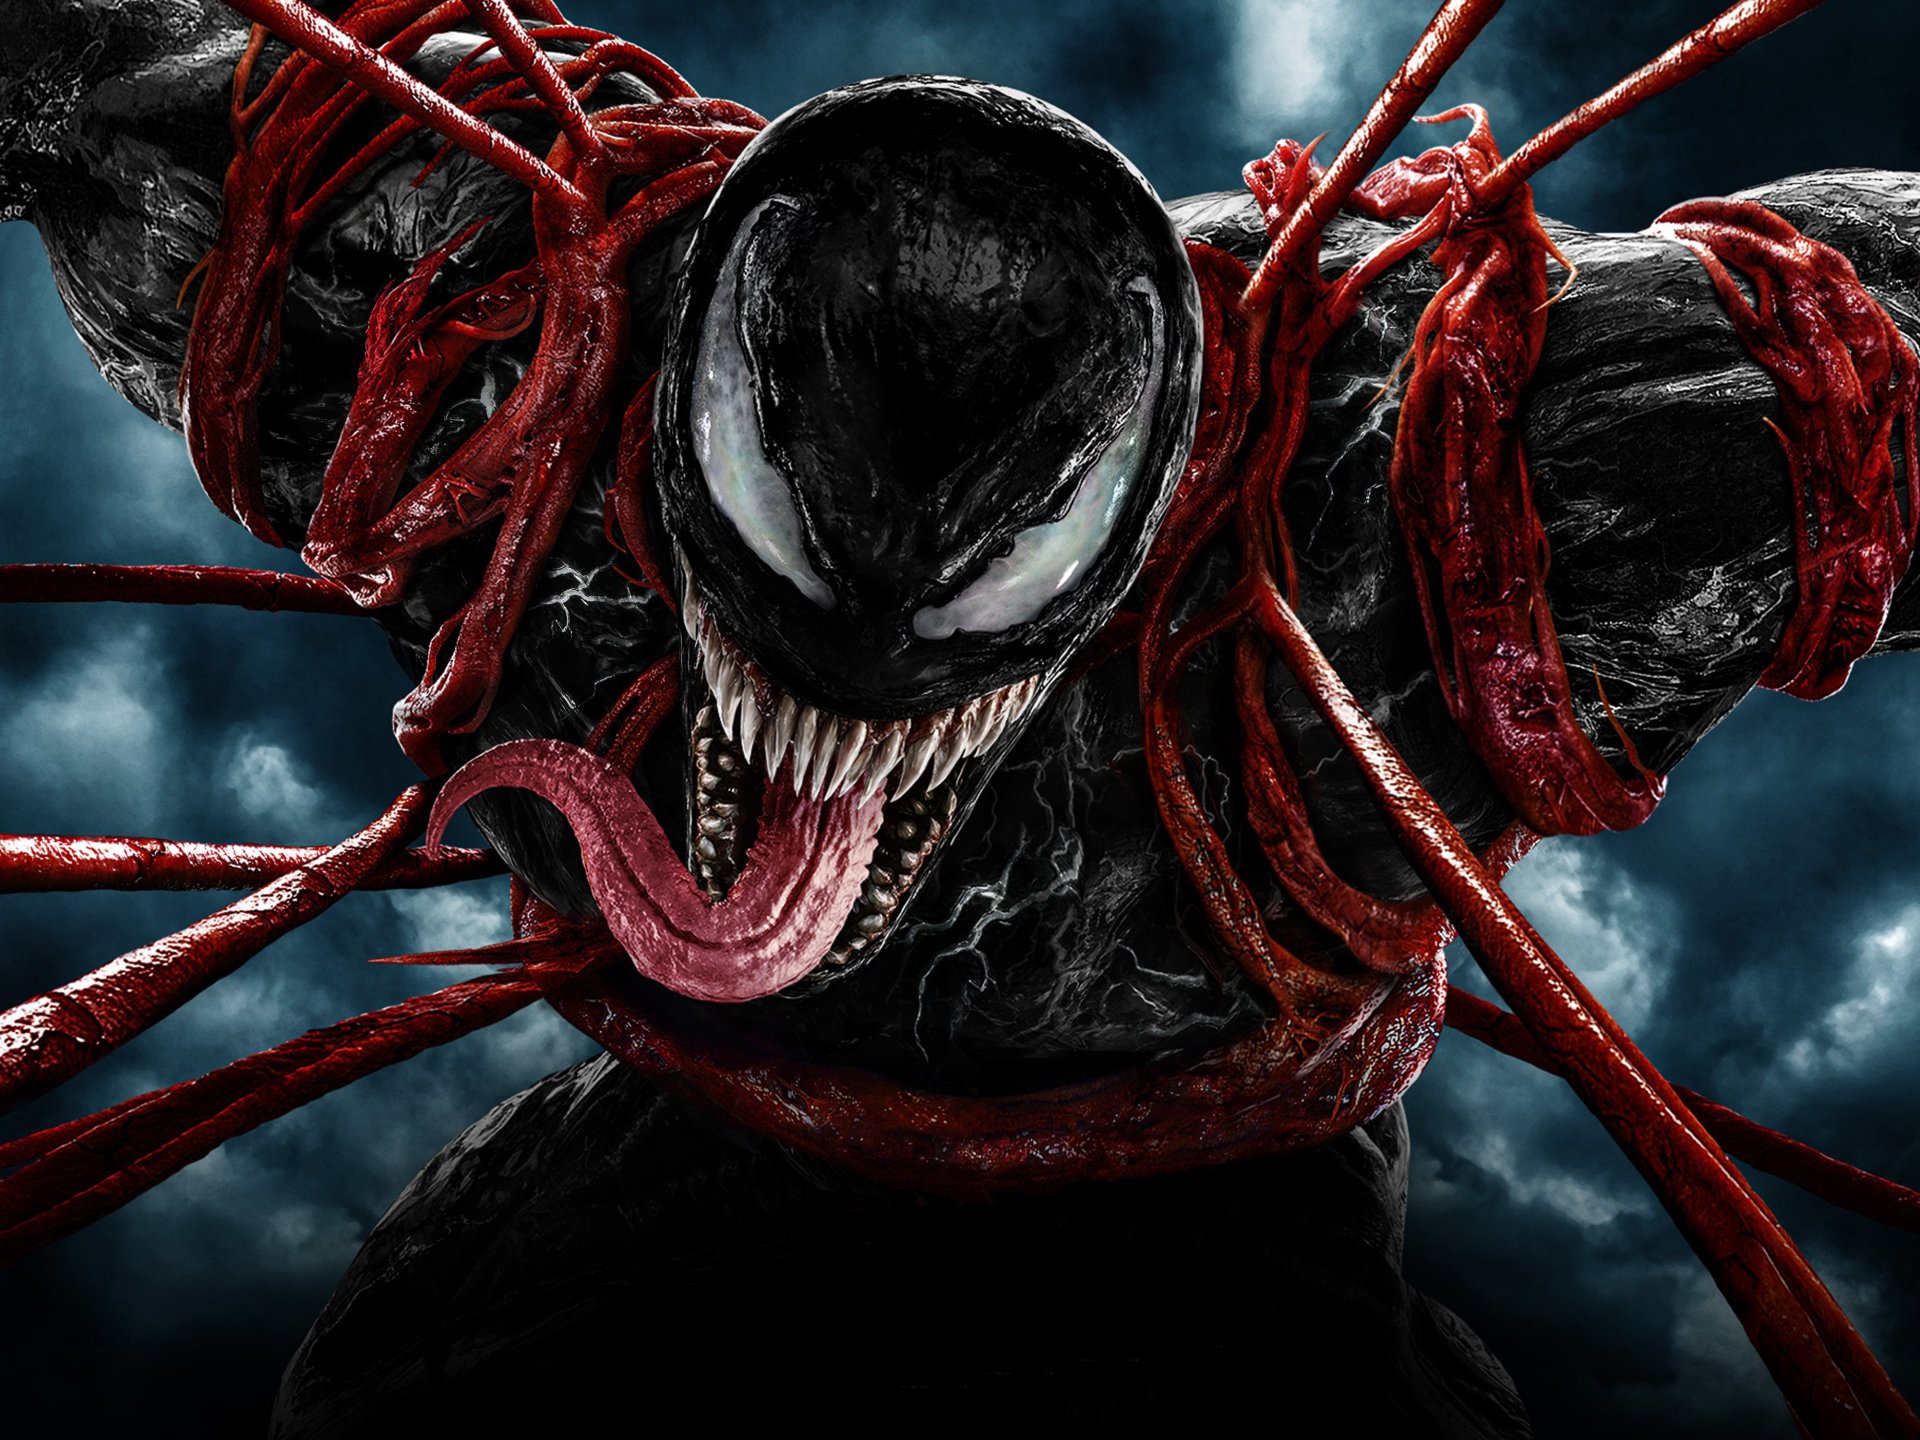 Venom: Let There Be Carnage 4k Ultra HD Wallpaper. 